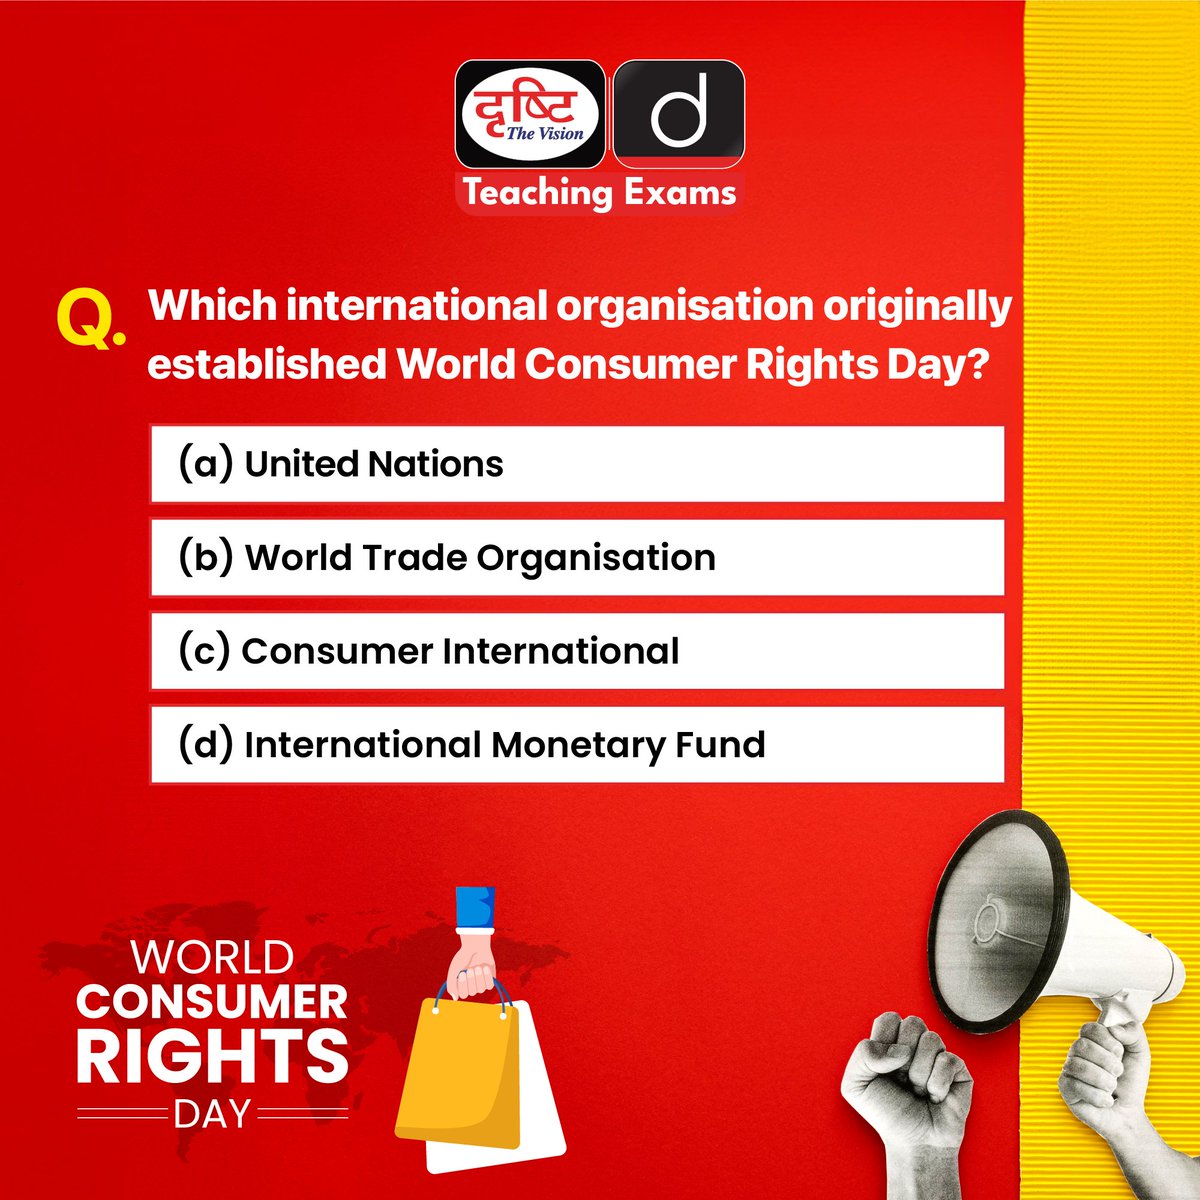 Together, let's ensure fairness for all consumers! Share your guesses for the quiz.

#WorldConsumerRightsDay #Consumerism #ConsumerRights #ConsumerProtection #ConsumerLaw #Rights #KnowYourRights #Goods #ConsumerGoods #March #Explore #Teaching #TeamDrishti #DrishtiTeachingExams